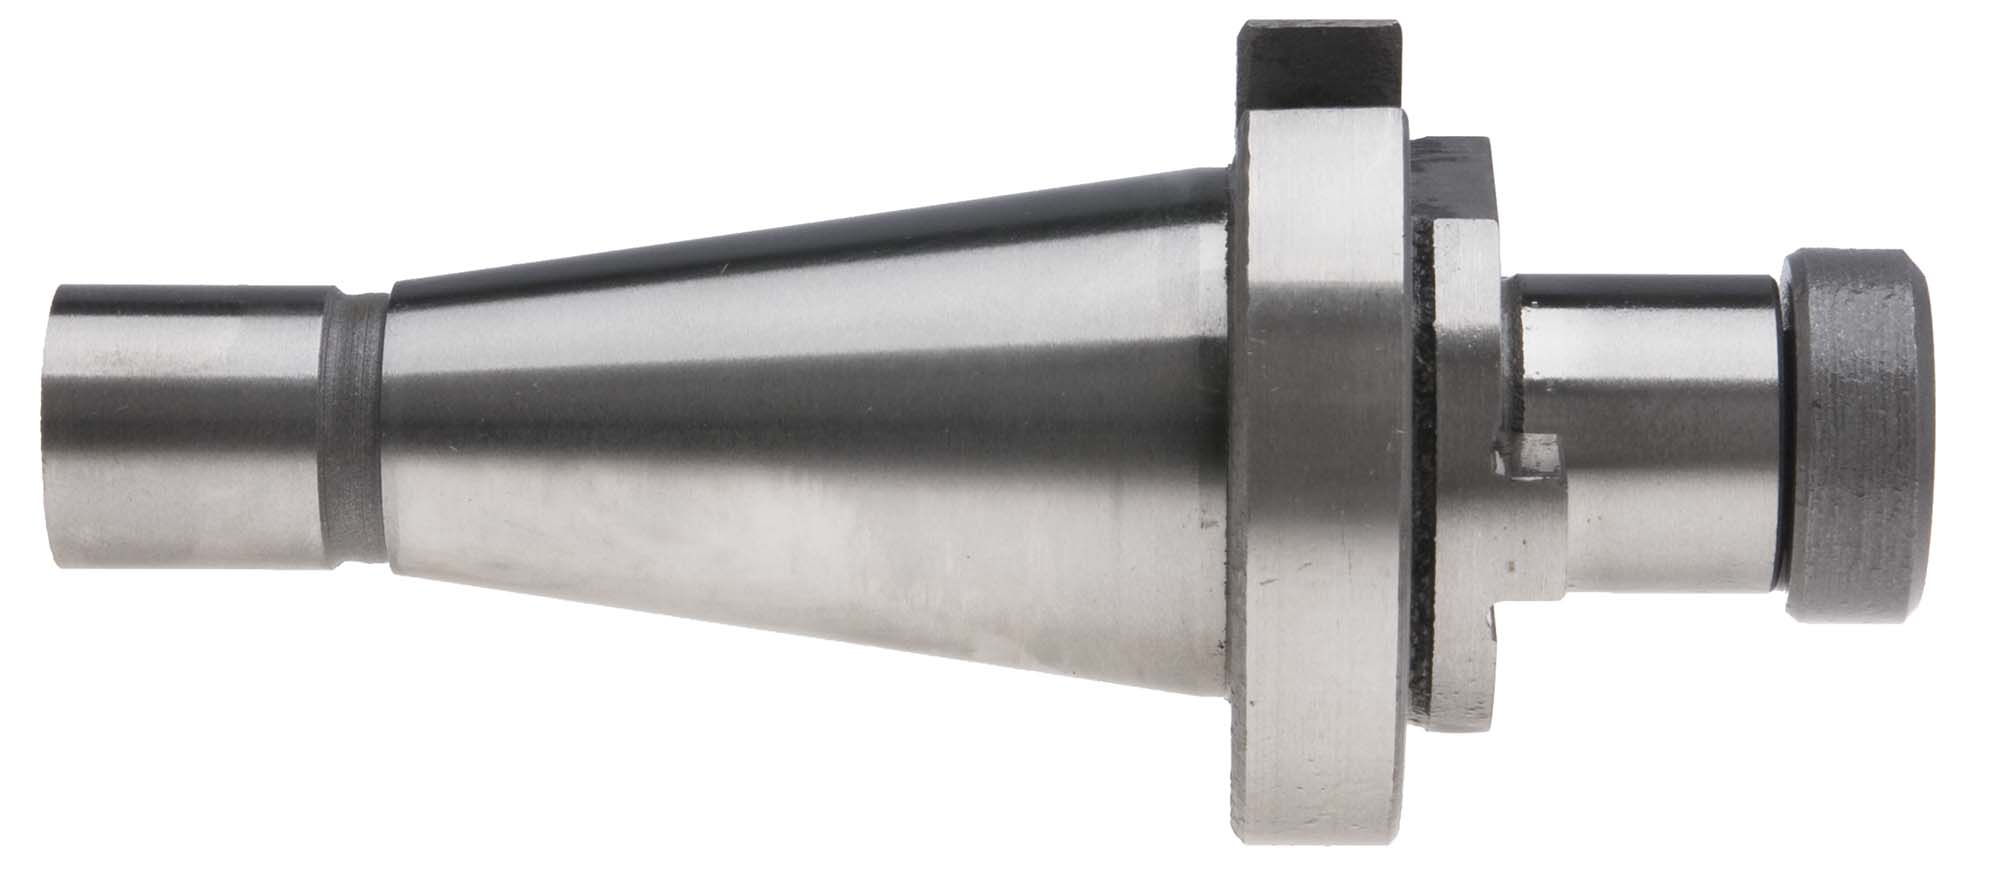 # 40 NST - 1-1/2 Shell End Mill Arbor